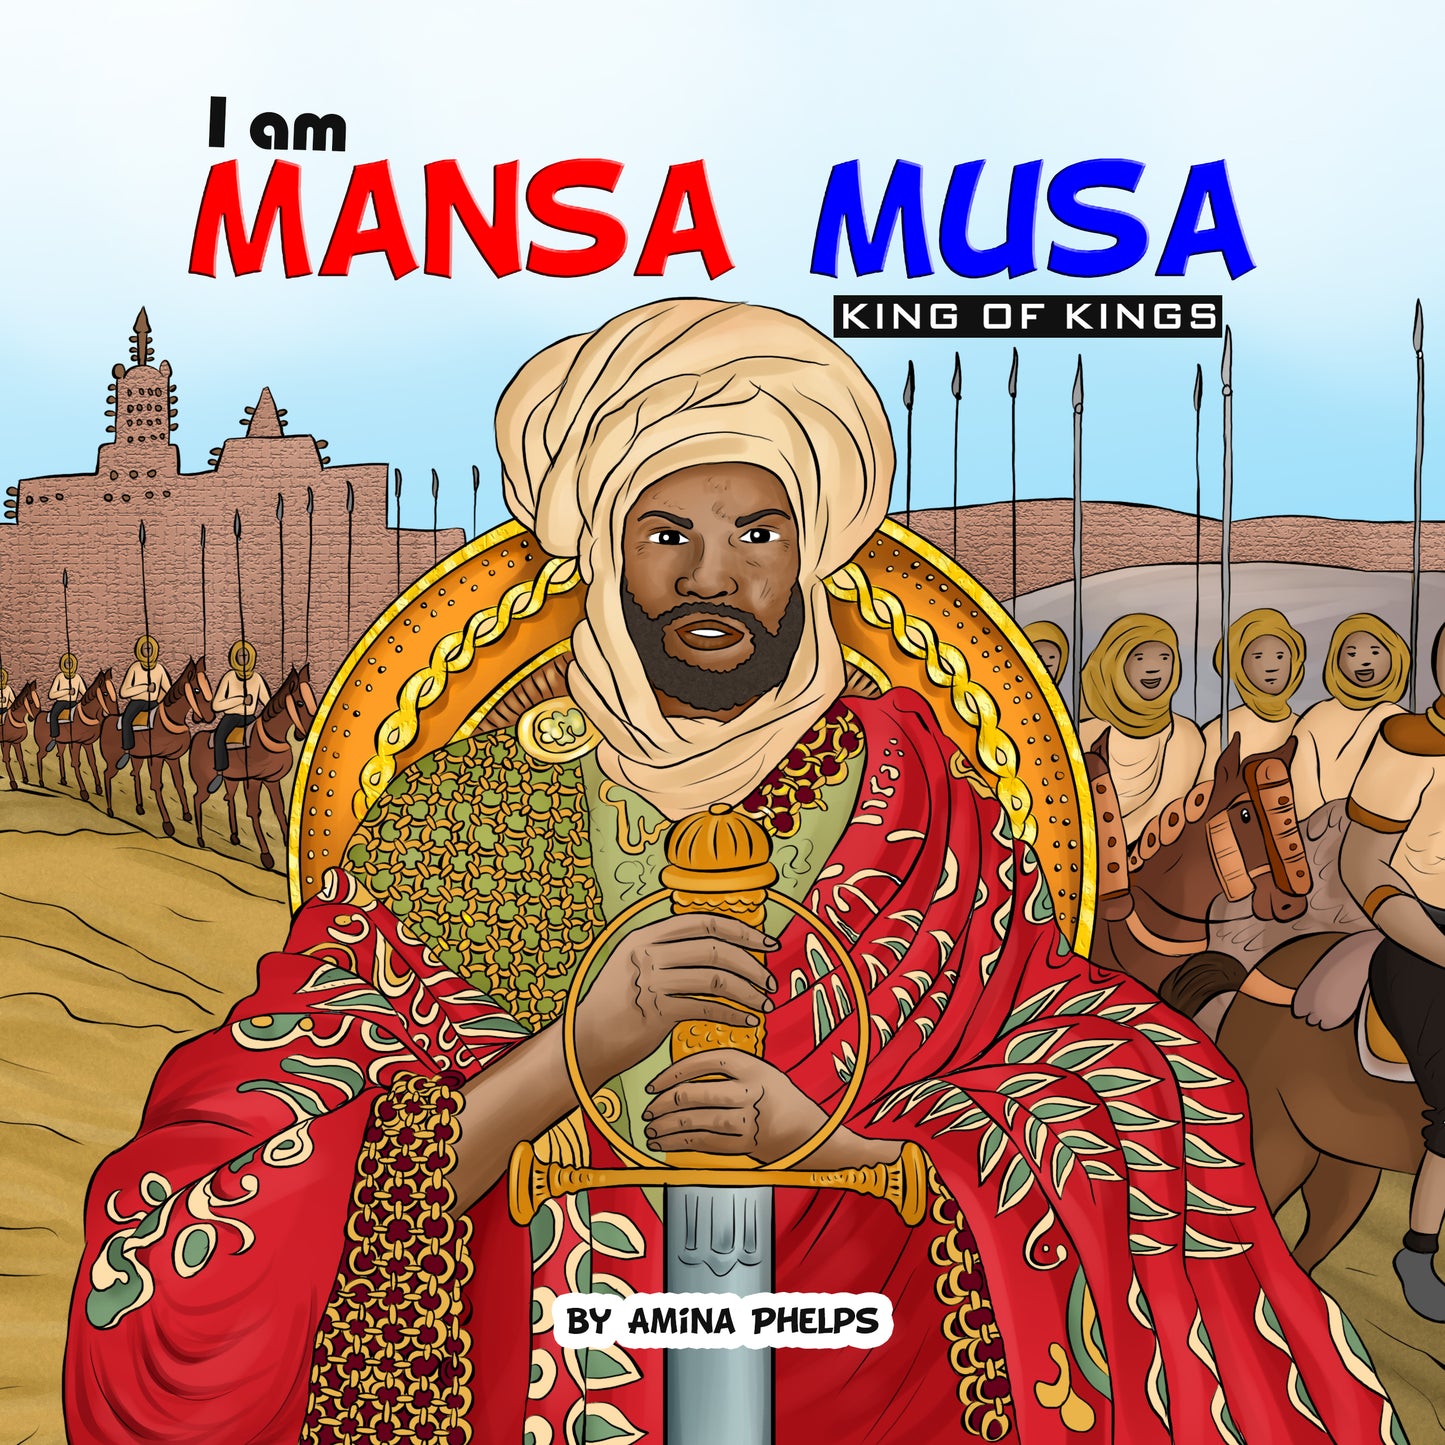 I am Mansa Musa: The King of Kings